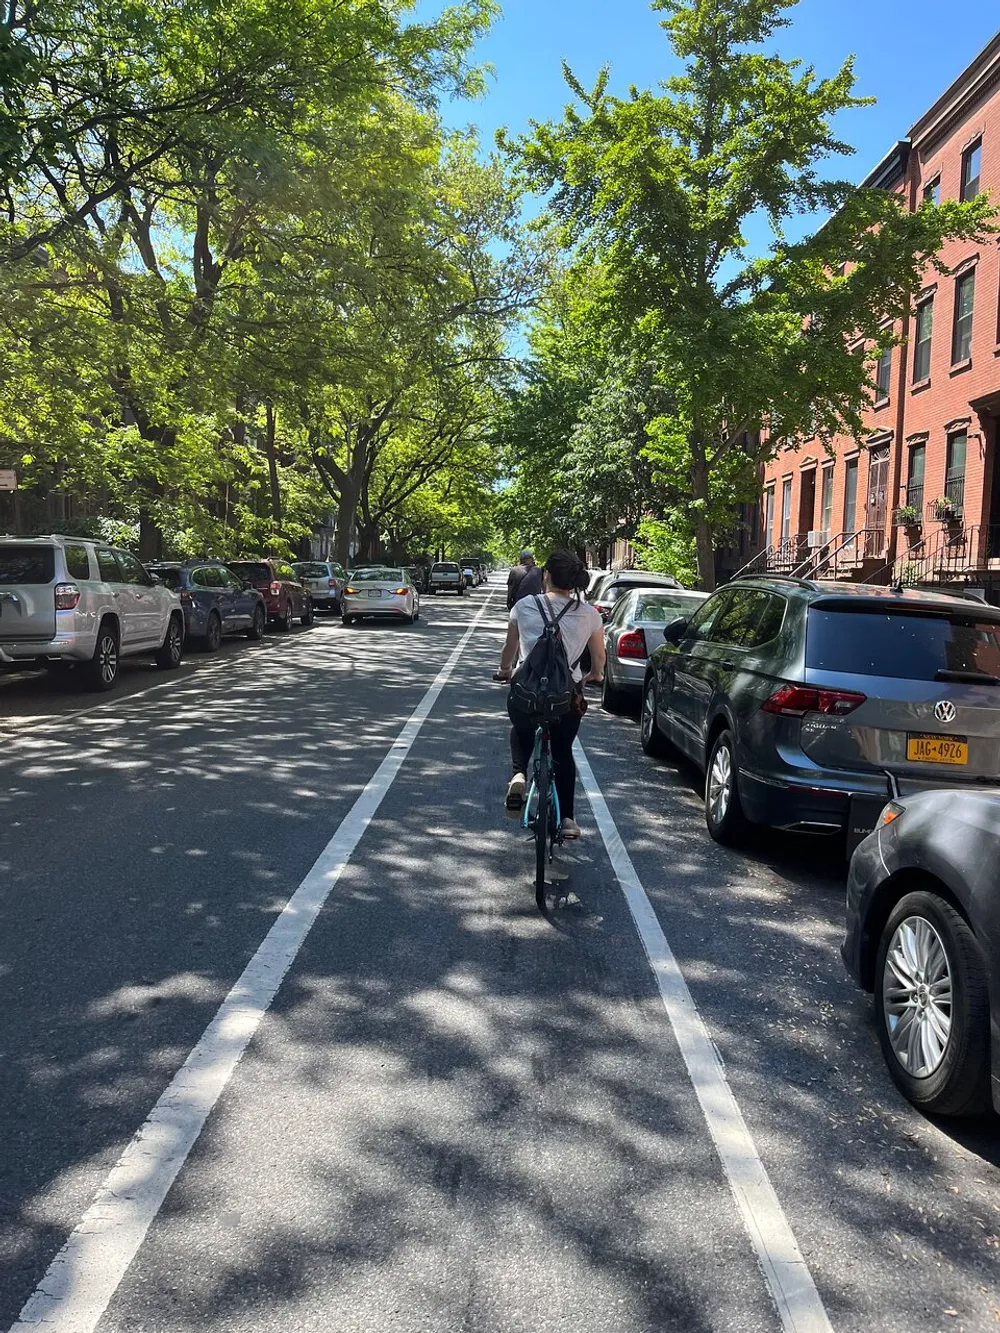 A person is cycling down a tree-lined street with parallel parked cars on a sunny day